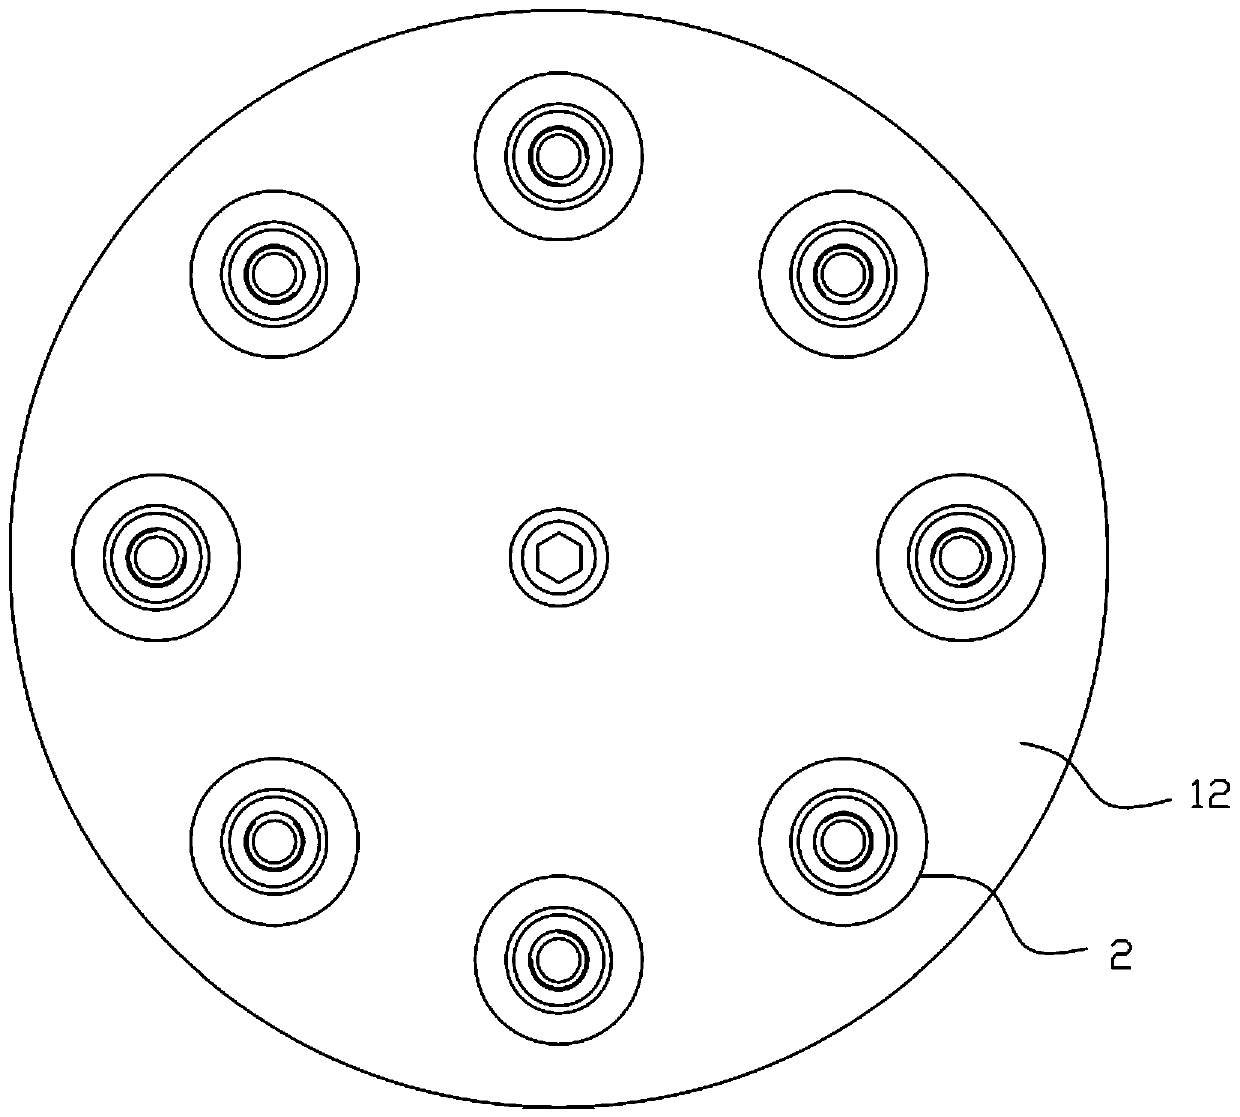 Pressing and rotating mechanism for gasket on cosmetic bottle body